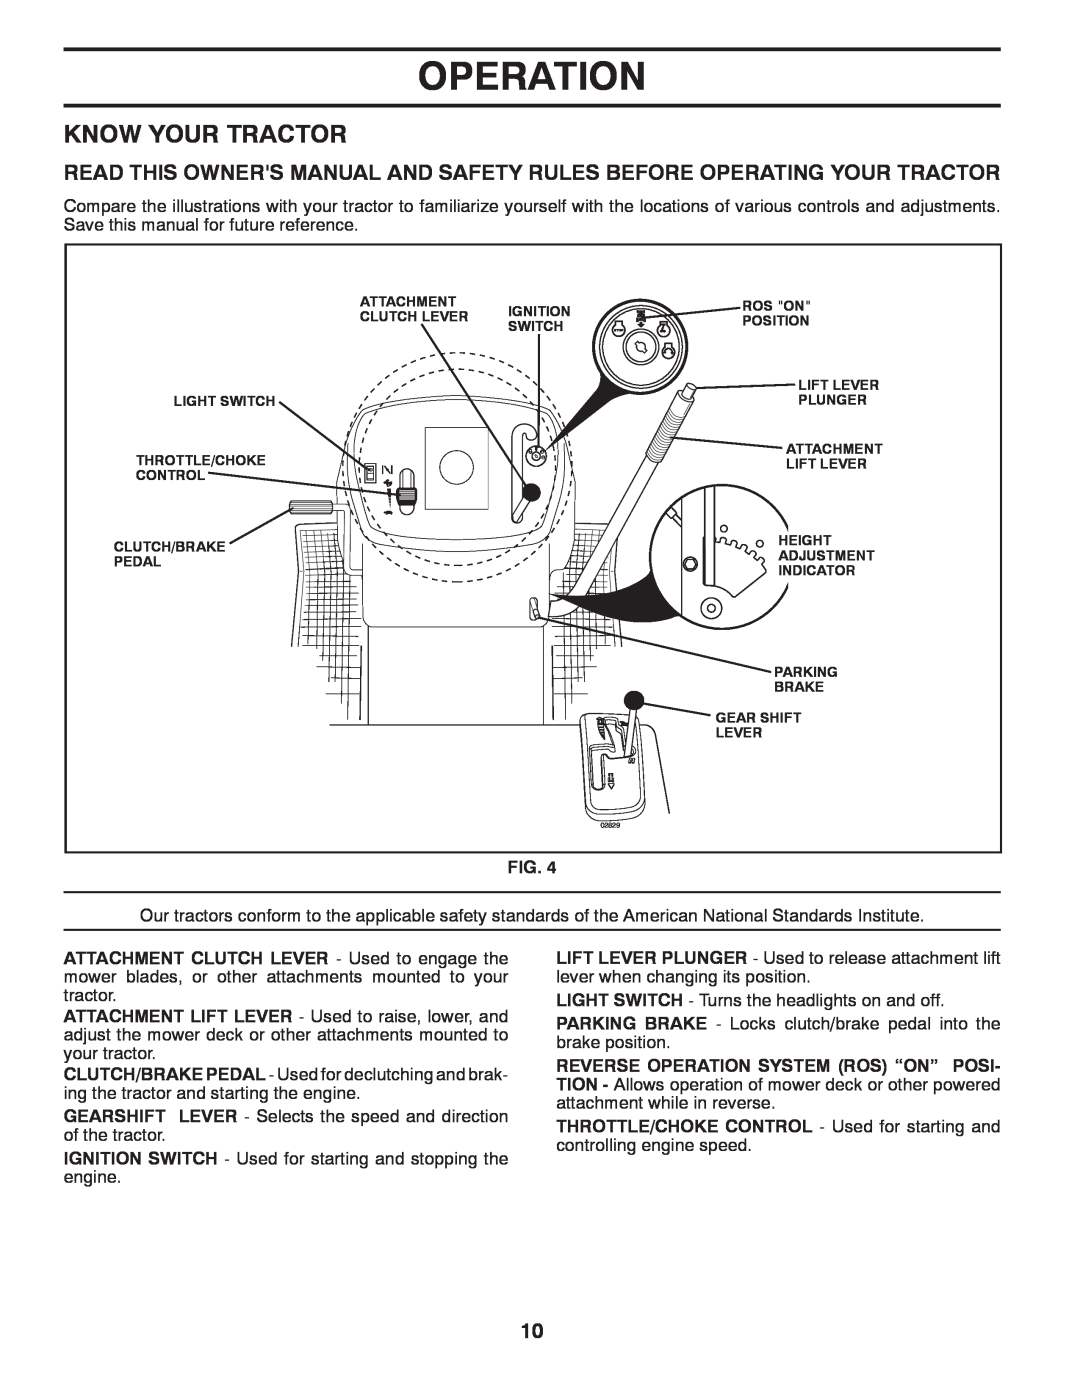 Murray 96012007200 manual Know Your Tractor, Operation 